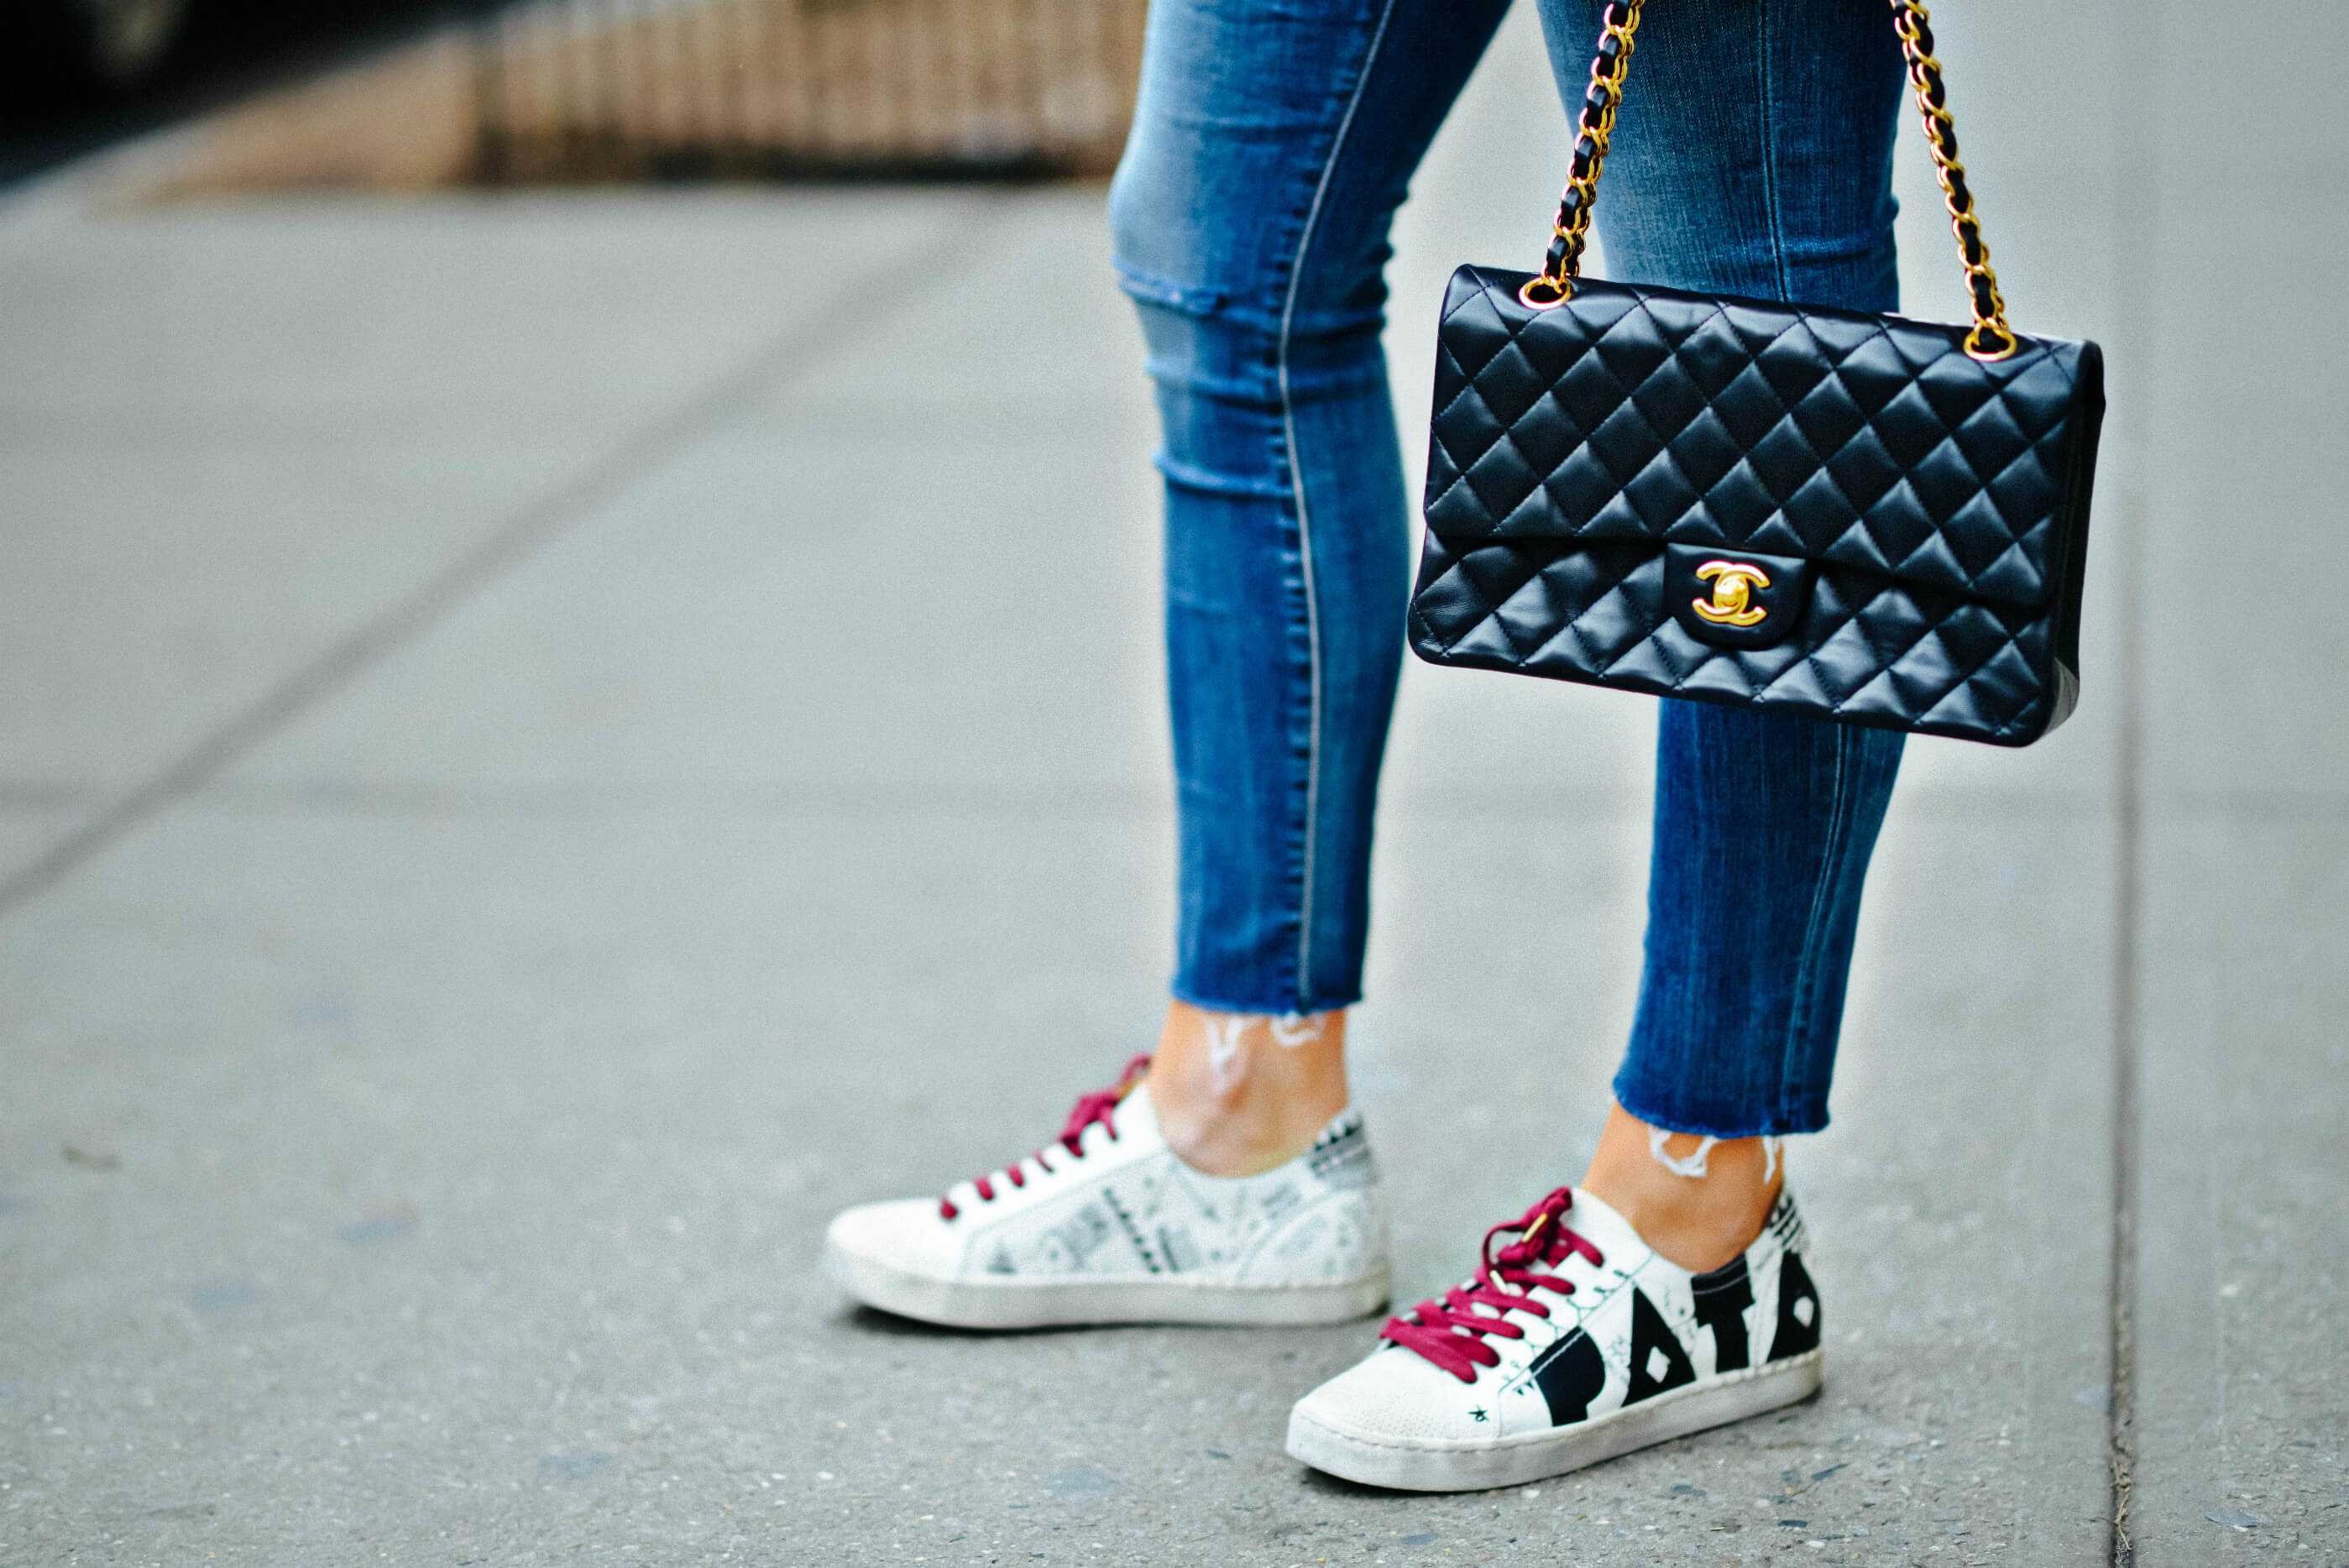 Chanel Black Classic Flap Bag, Dolce Vita Sneakers, Tilden of To Be Bright